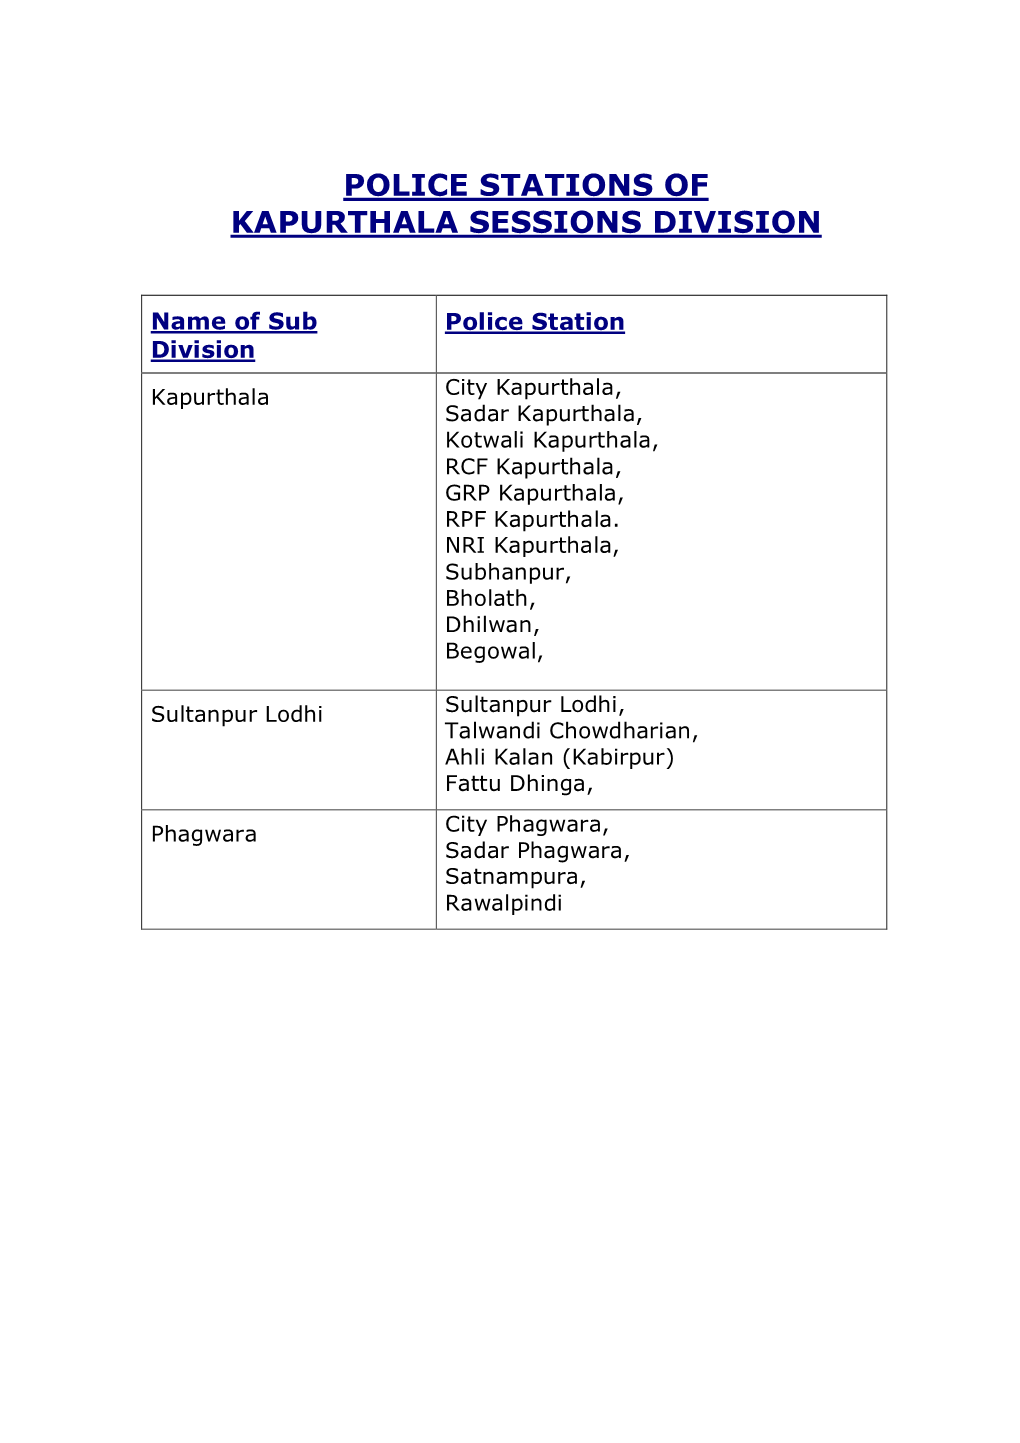 Police Stations of Kapurthala Sessions Division